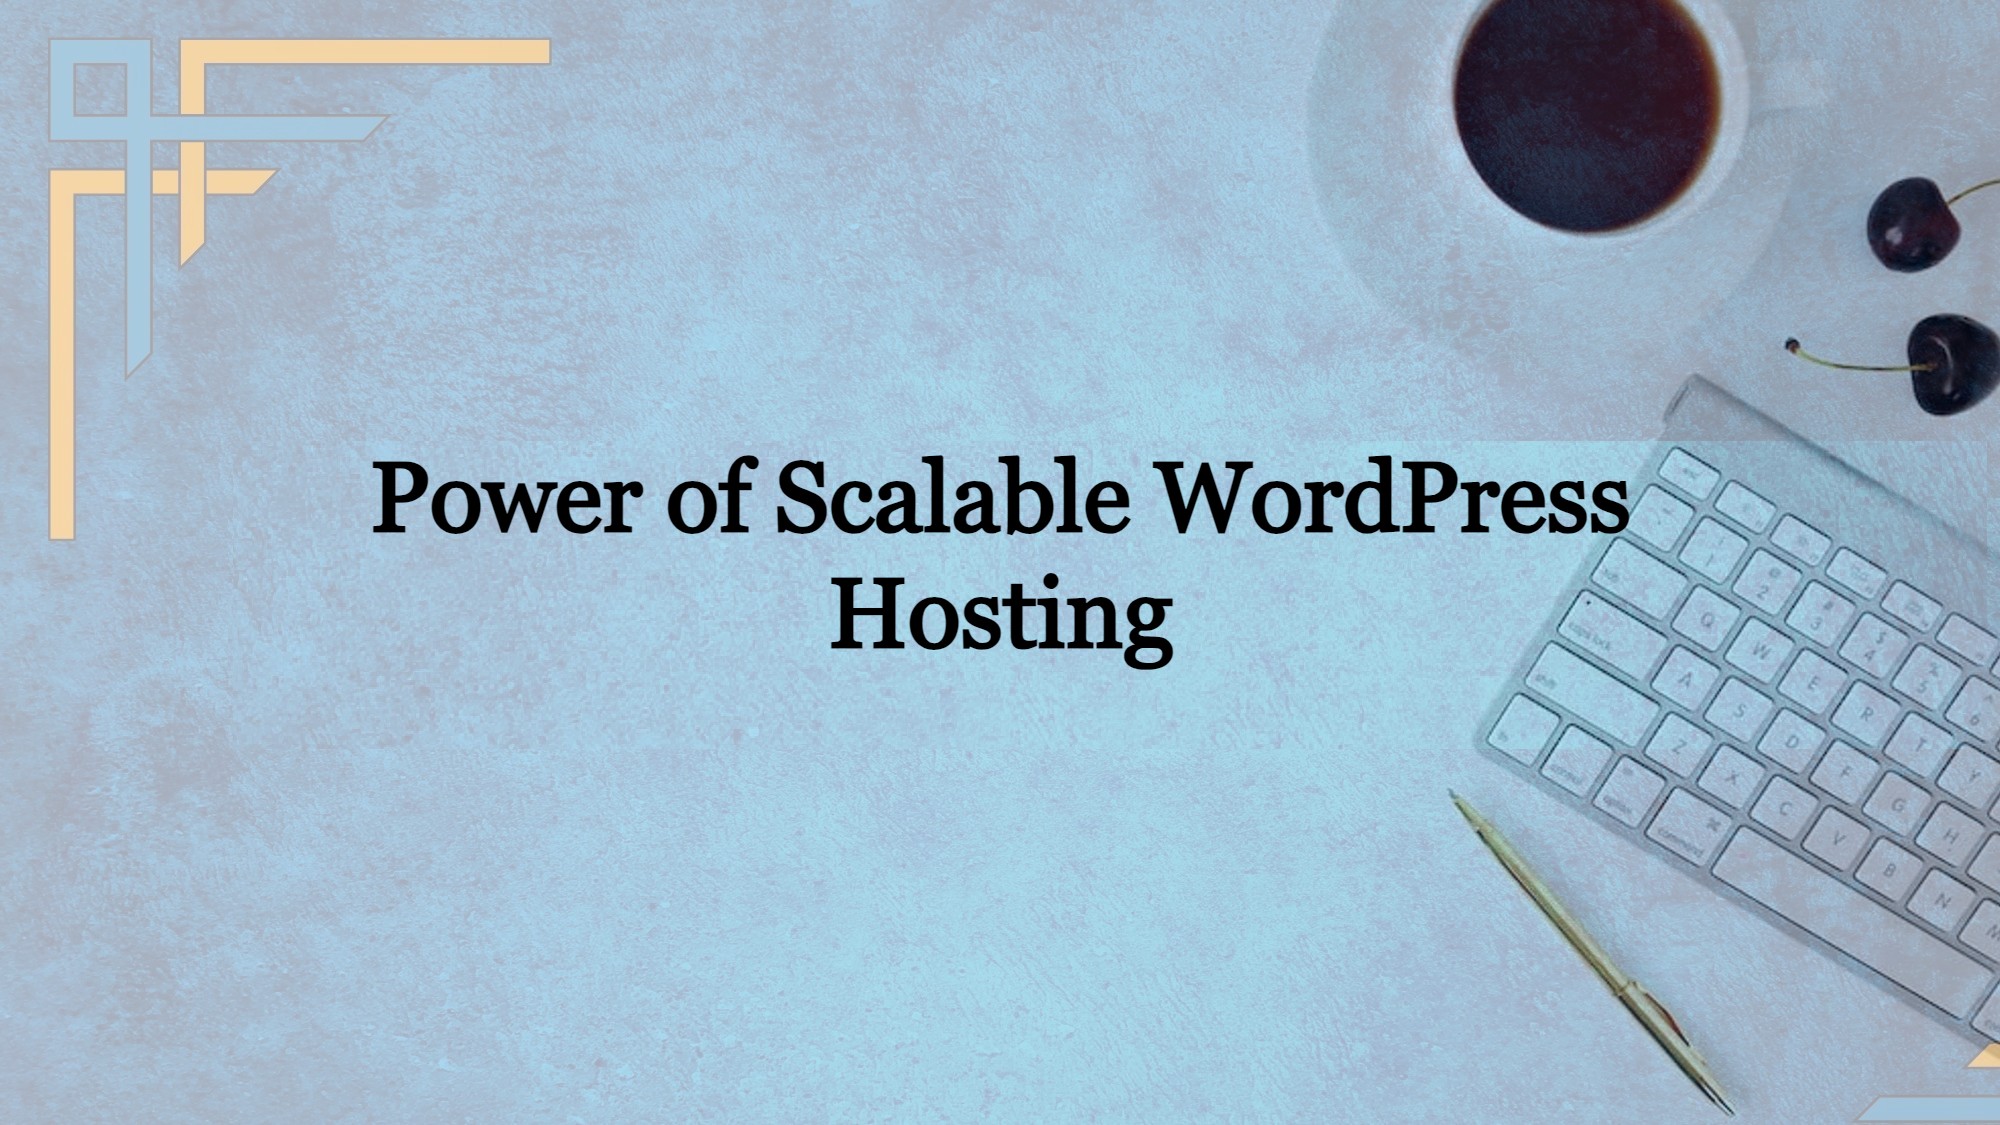 Power of Scalable WordPress Hosting